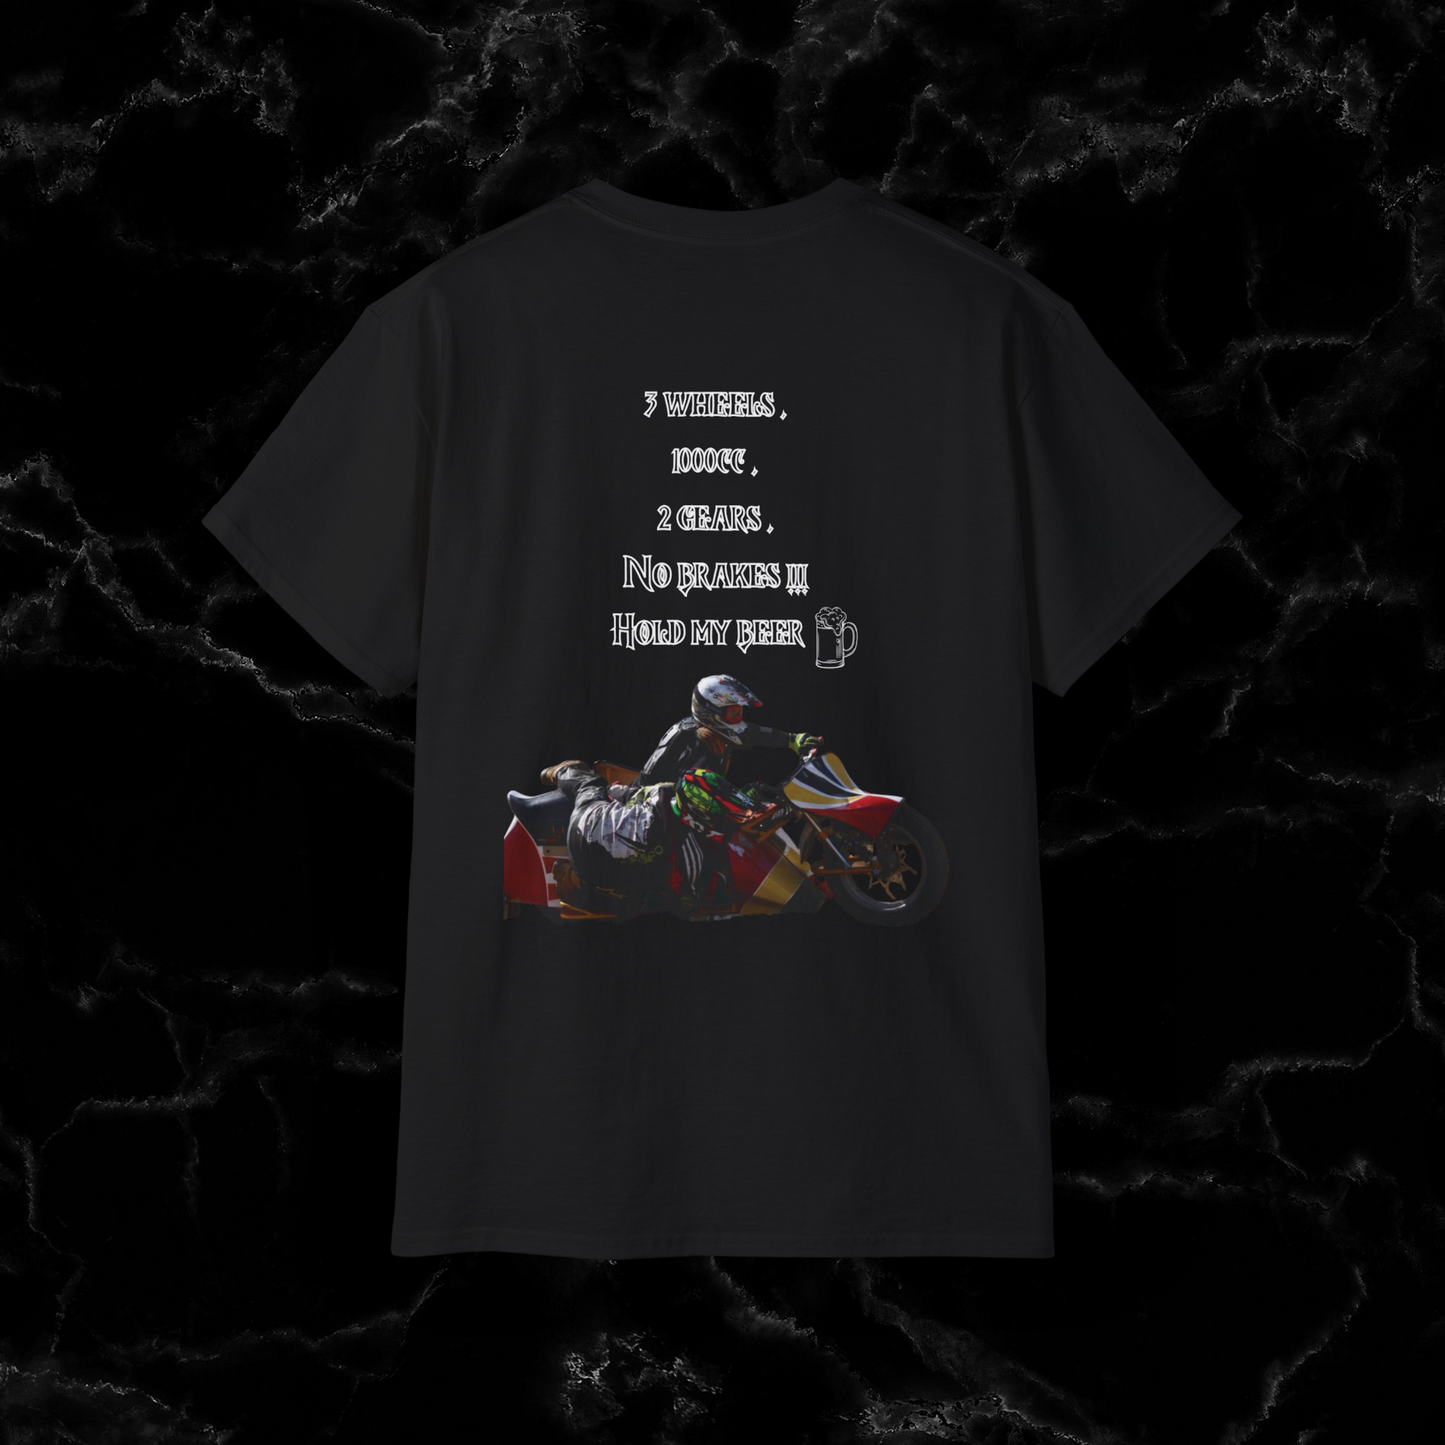 Sidecar Motorcycle Tee - 3 Wheels, 1000cc, 2 Gears | Unisex Sidecar T-Shirt with Front and Back Design T-Shirt   